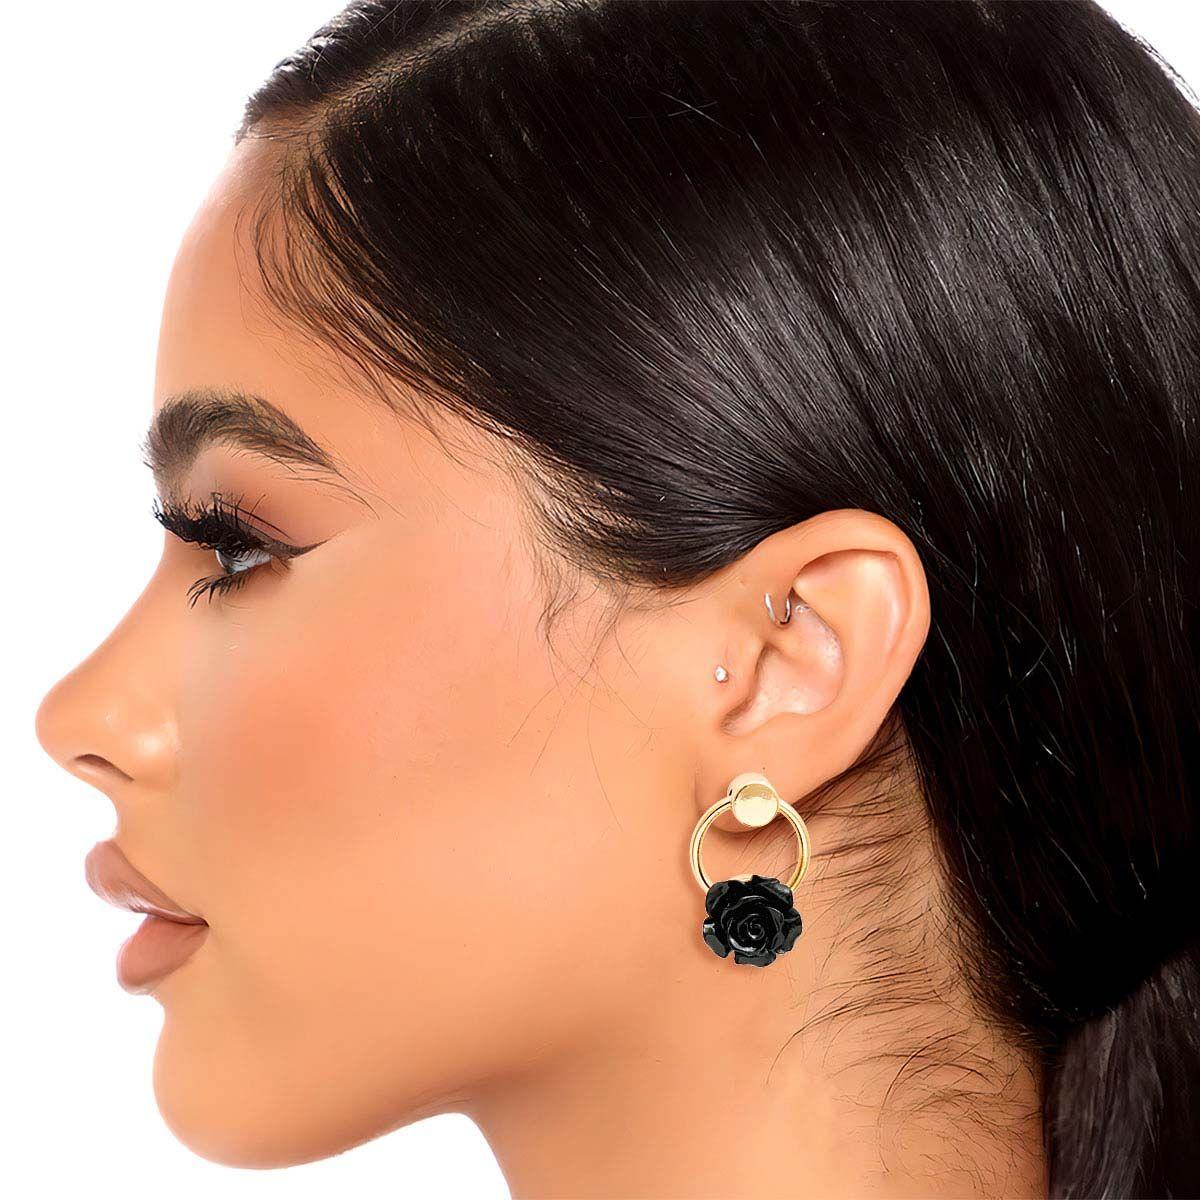 Black Rose Earrings: Chic Meets Classic Style